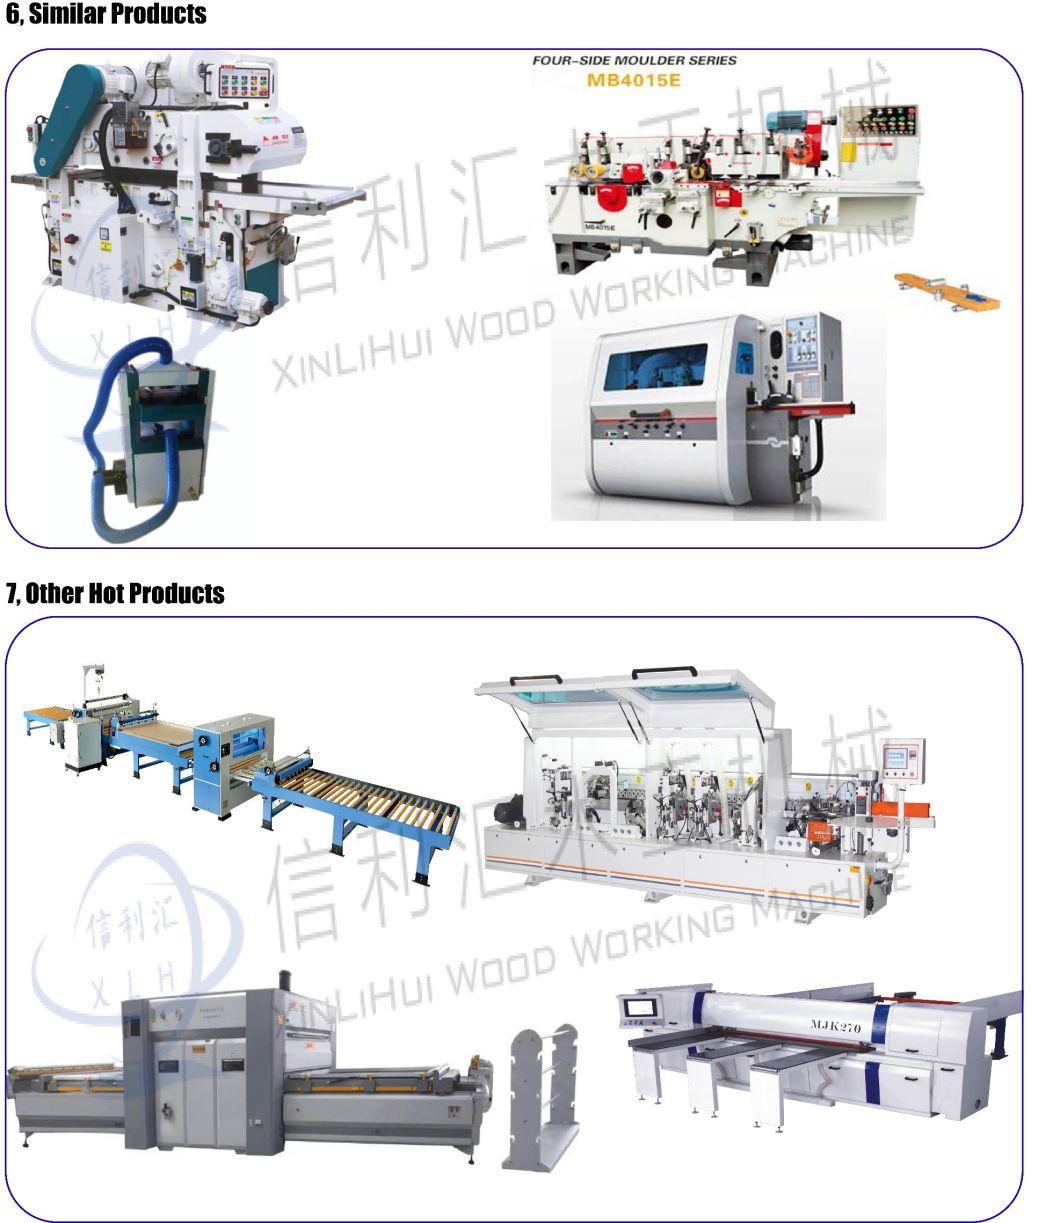 Woodworking Machinery Four-Sided Planing Four-Axis Five-Axis Four-Sided Planing Woodworking Six-Axis Four-Sided Planing